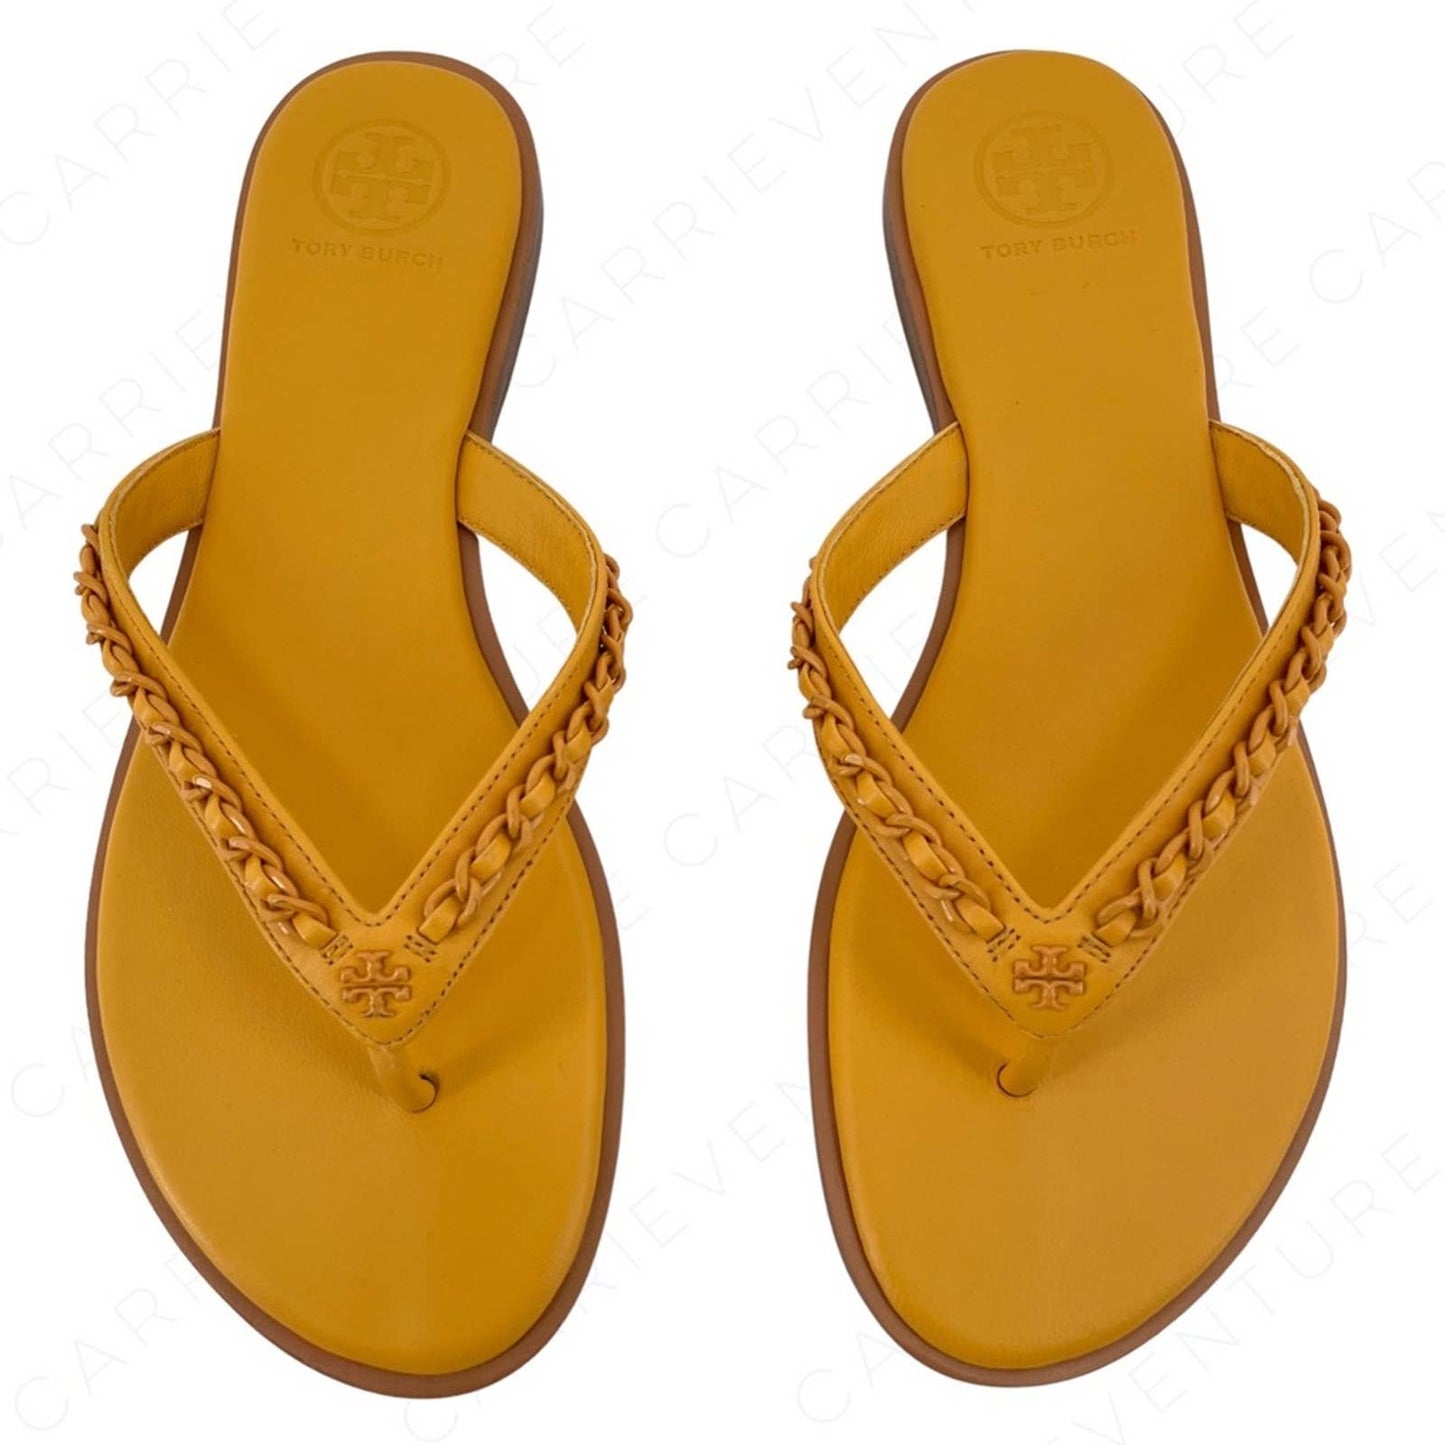 Tory Burch Everly Chain Thong Sandals Nappa Leather Light Turmeric Gold Orange Size 7